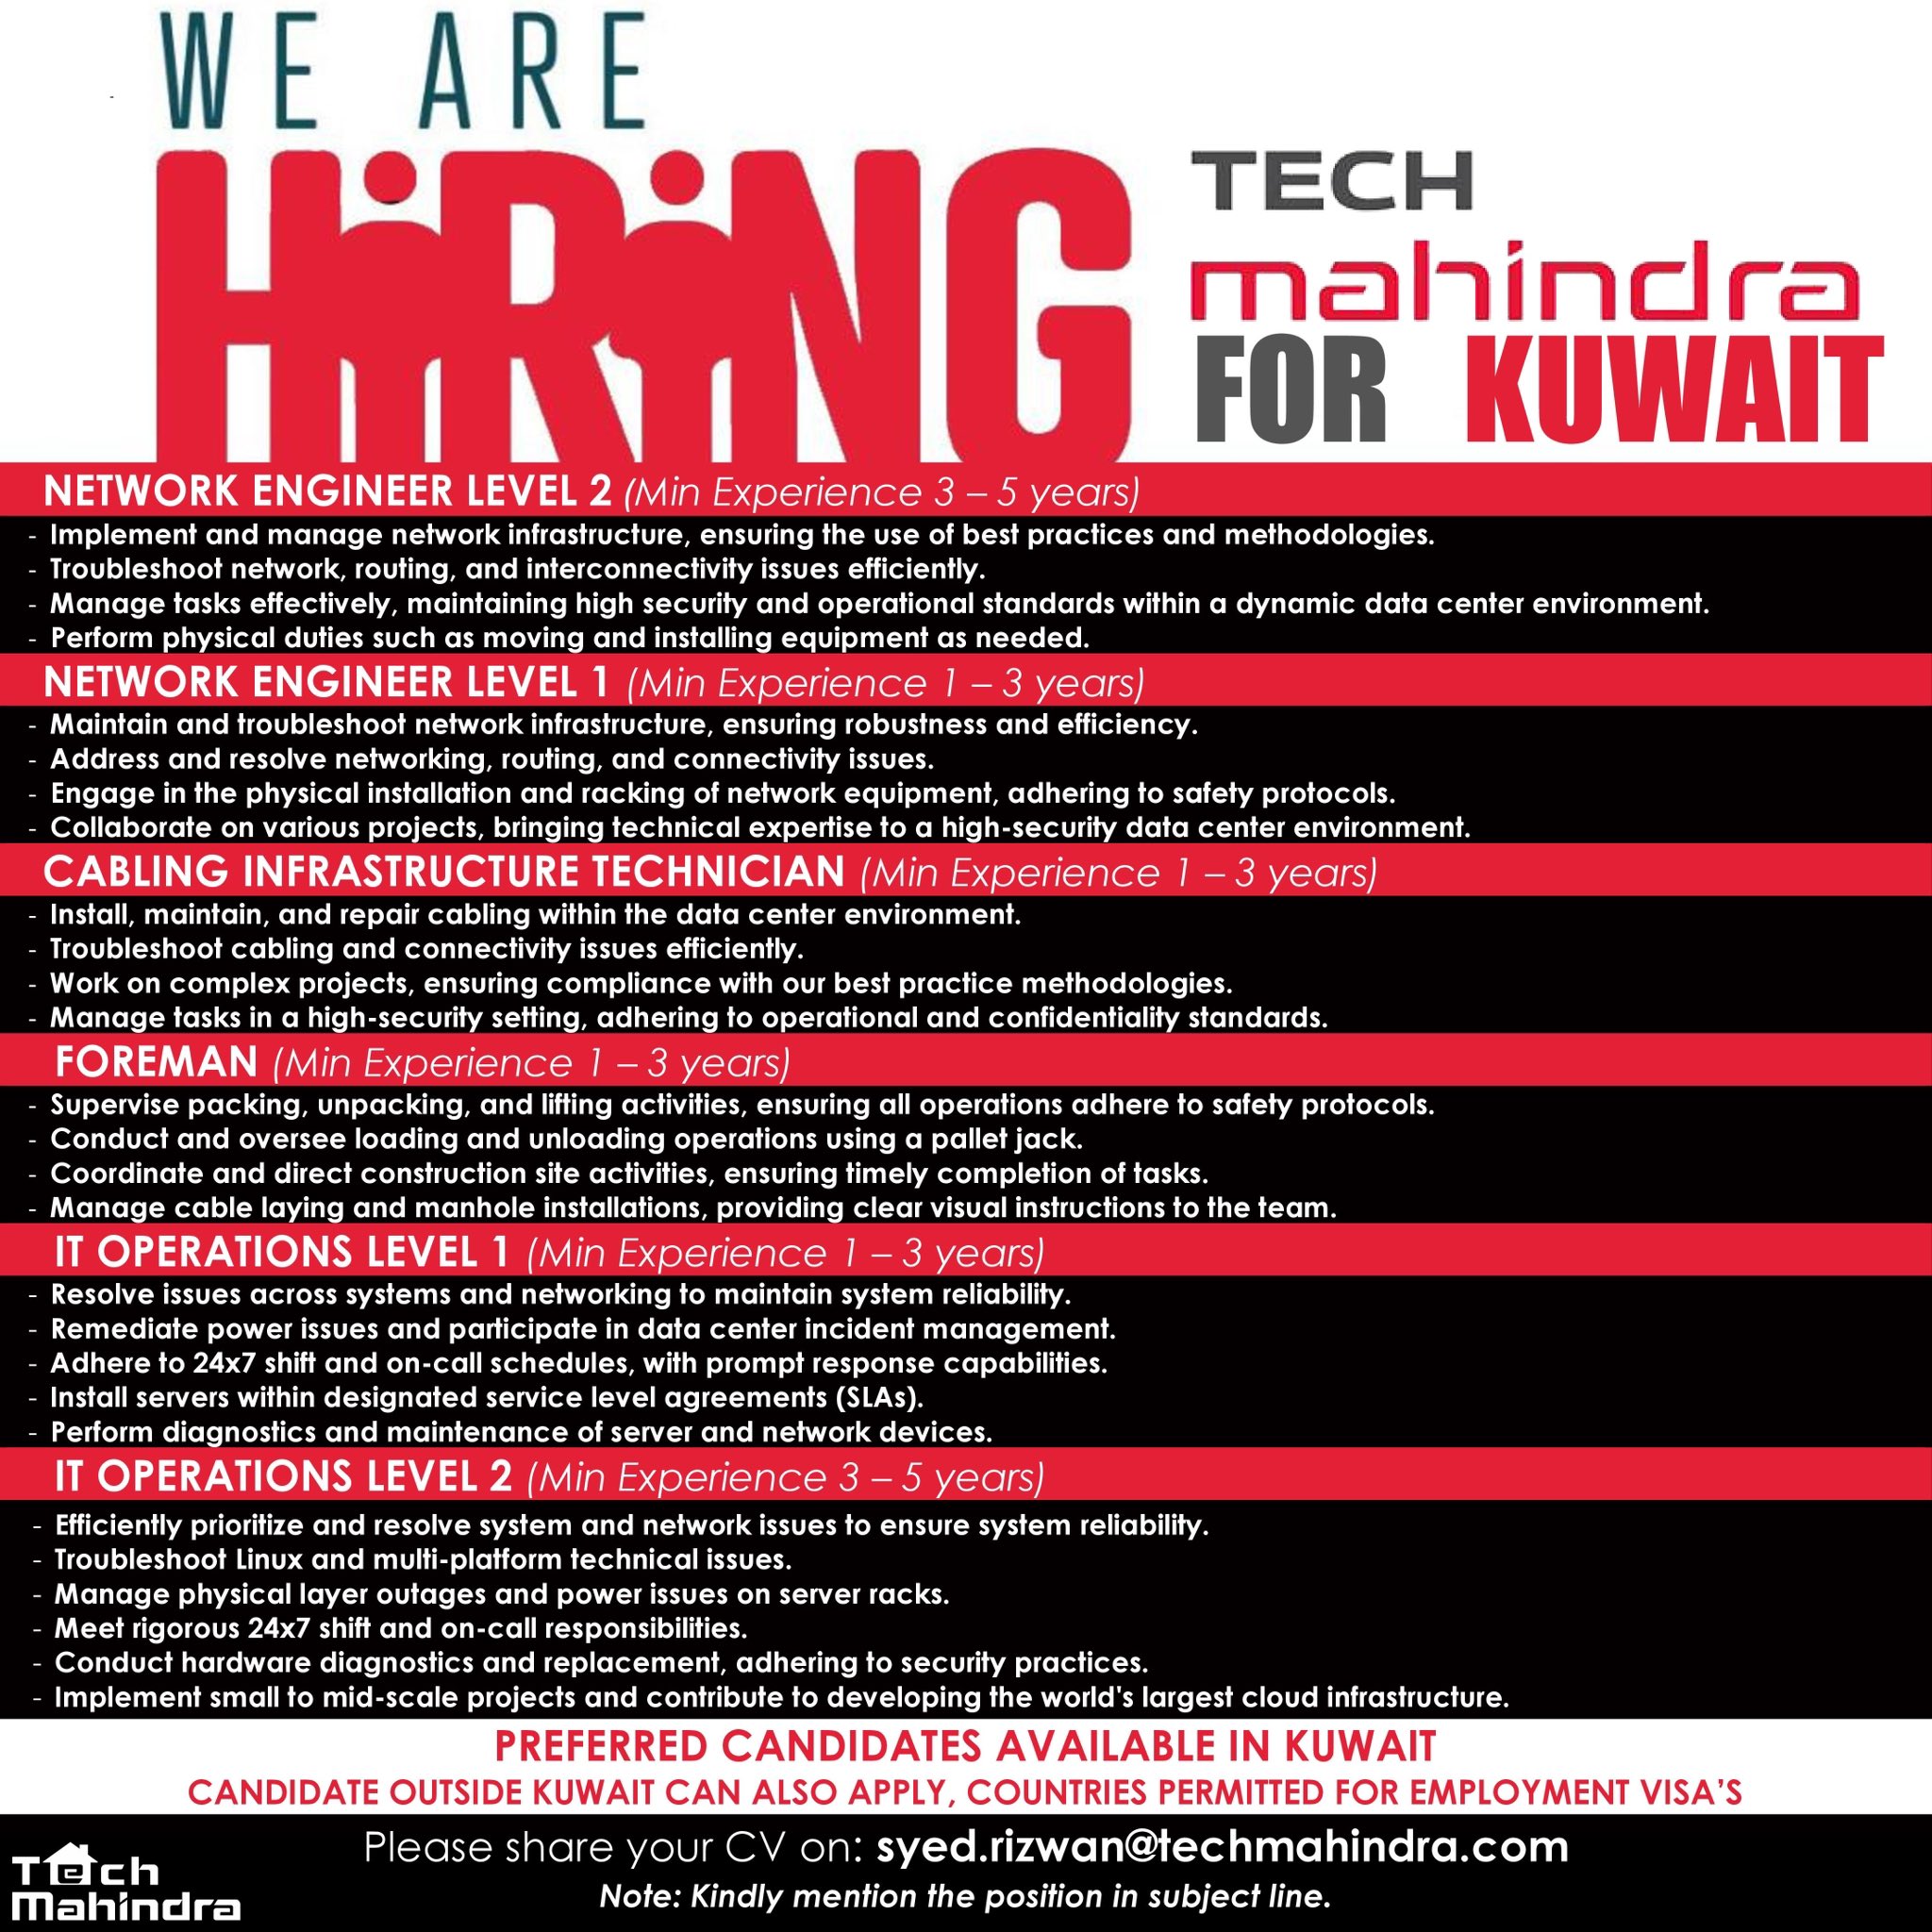 Image Latest Jobs in Tech Mahindra for Kuwait